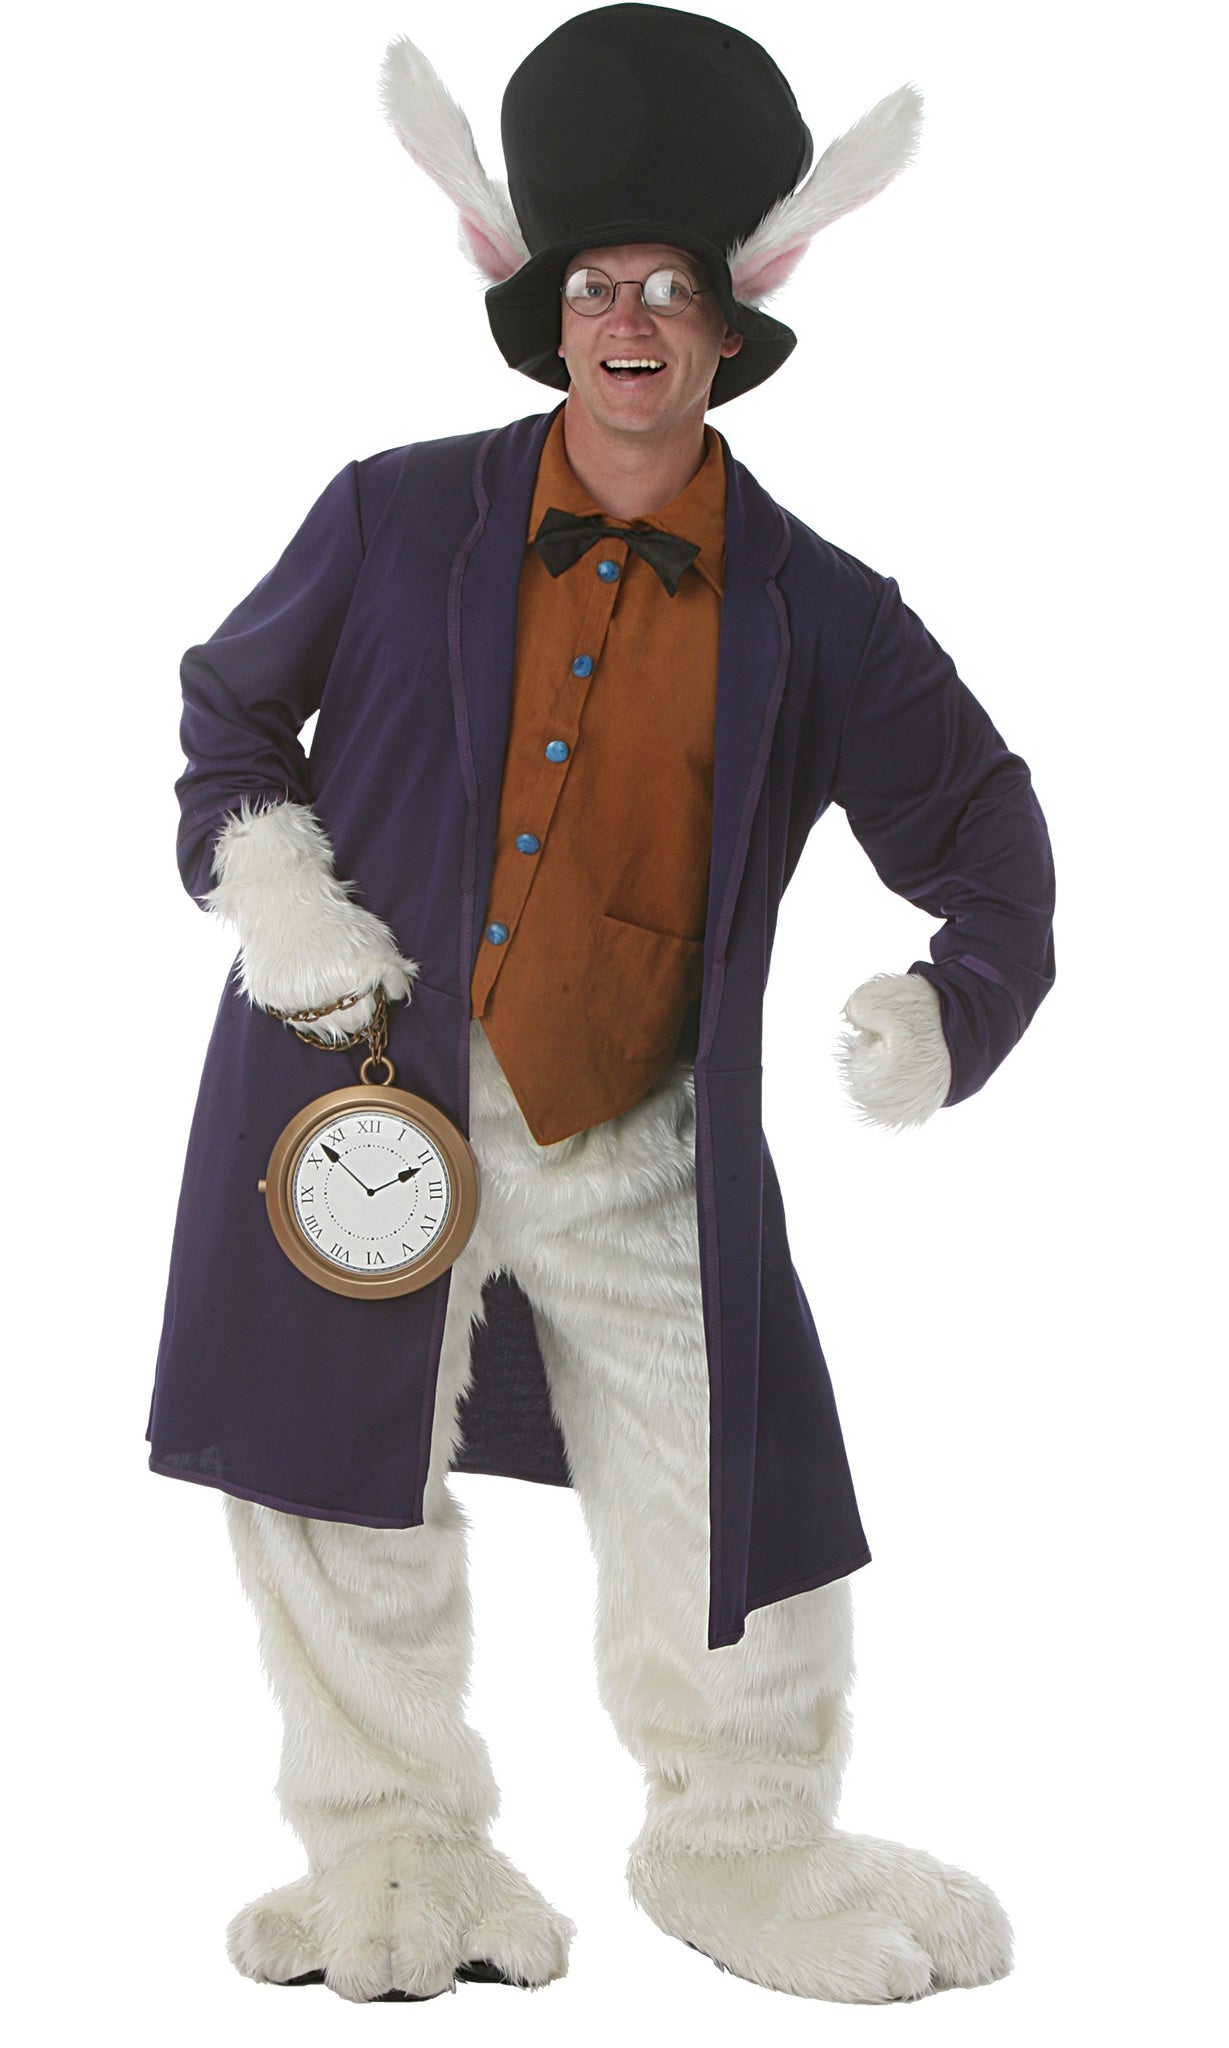 White rabbit costume, with hat and big ears